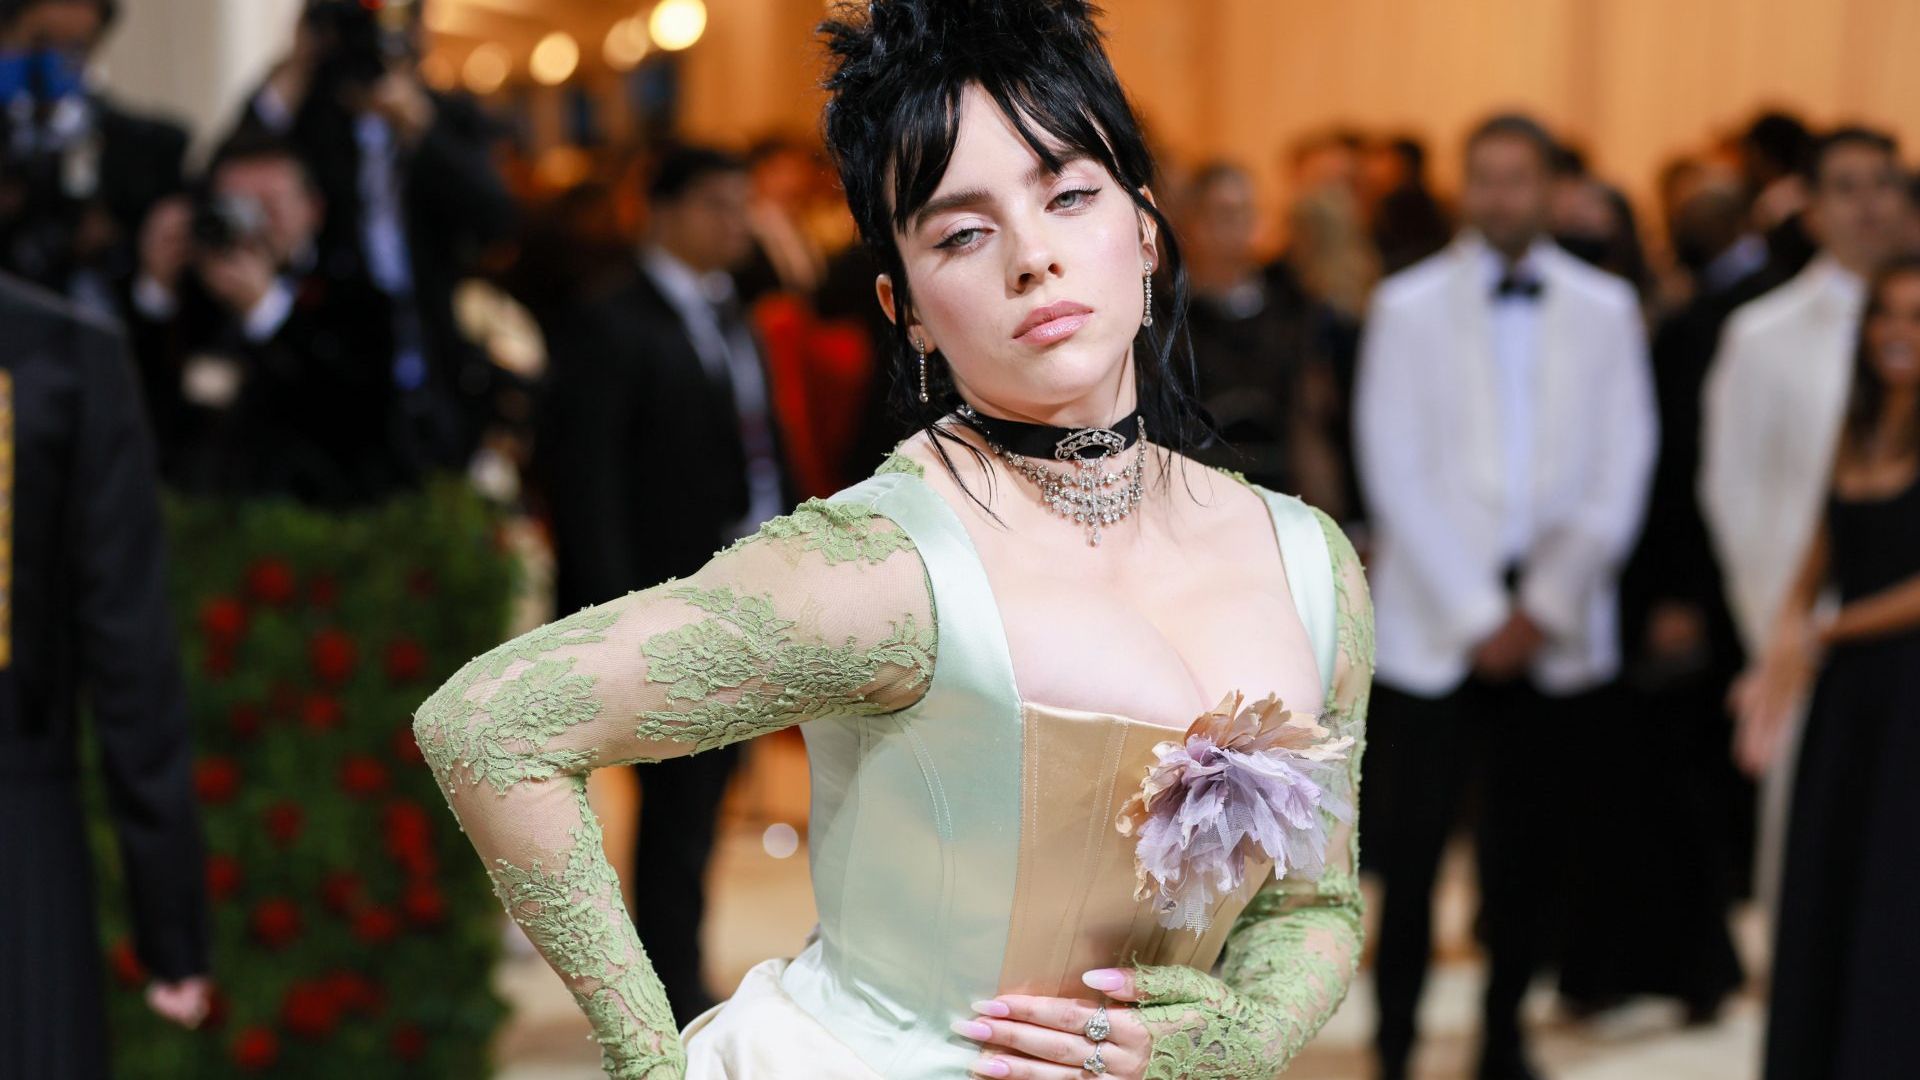 Met Gala 2022: Billie Eilish and Camila Cabello wear upcycled